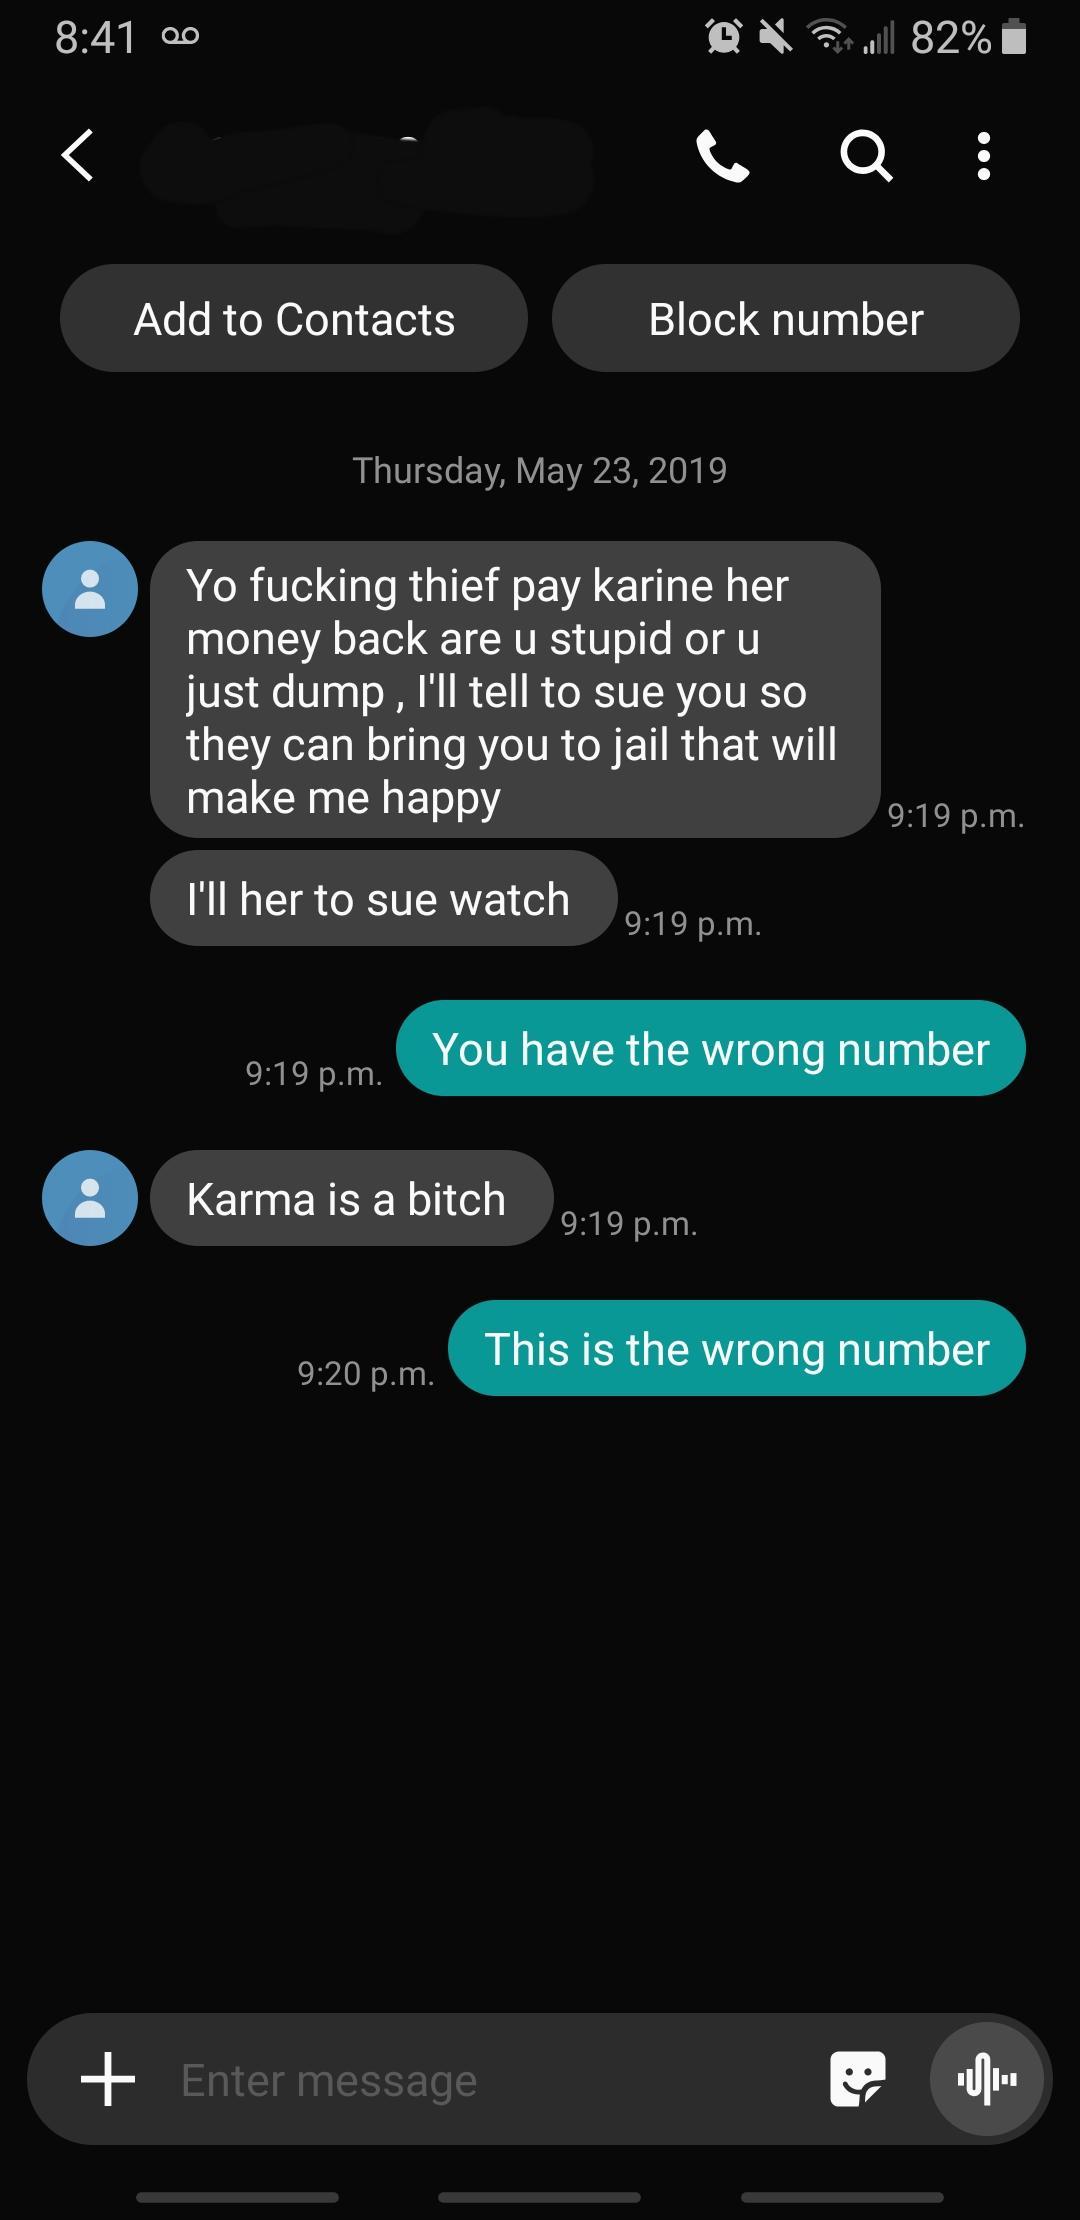 wrong number screenshot - 00 Dj 82% Add to Contacts Block number Thursday, Yo fucking thief pay karine her money back are u stupid oru just dump, I'll tell to sue you so they can bring you to jail that will make me happy p.m. I'll her to sue watch p.m. Yo